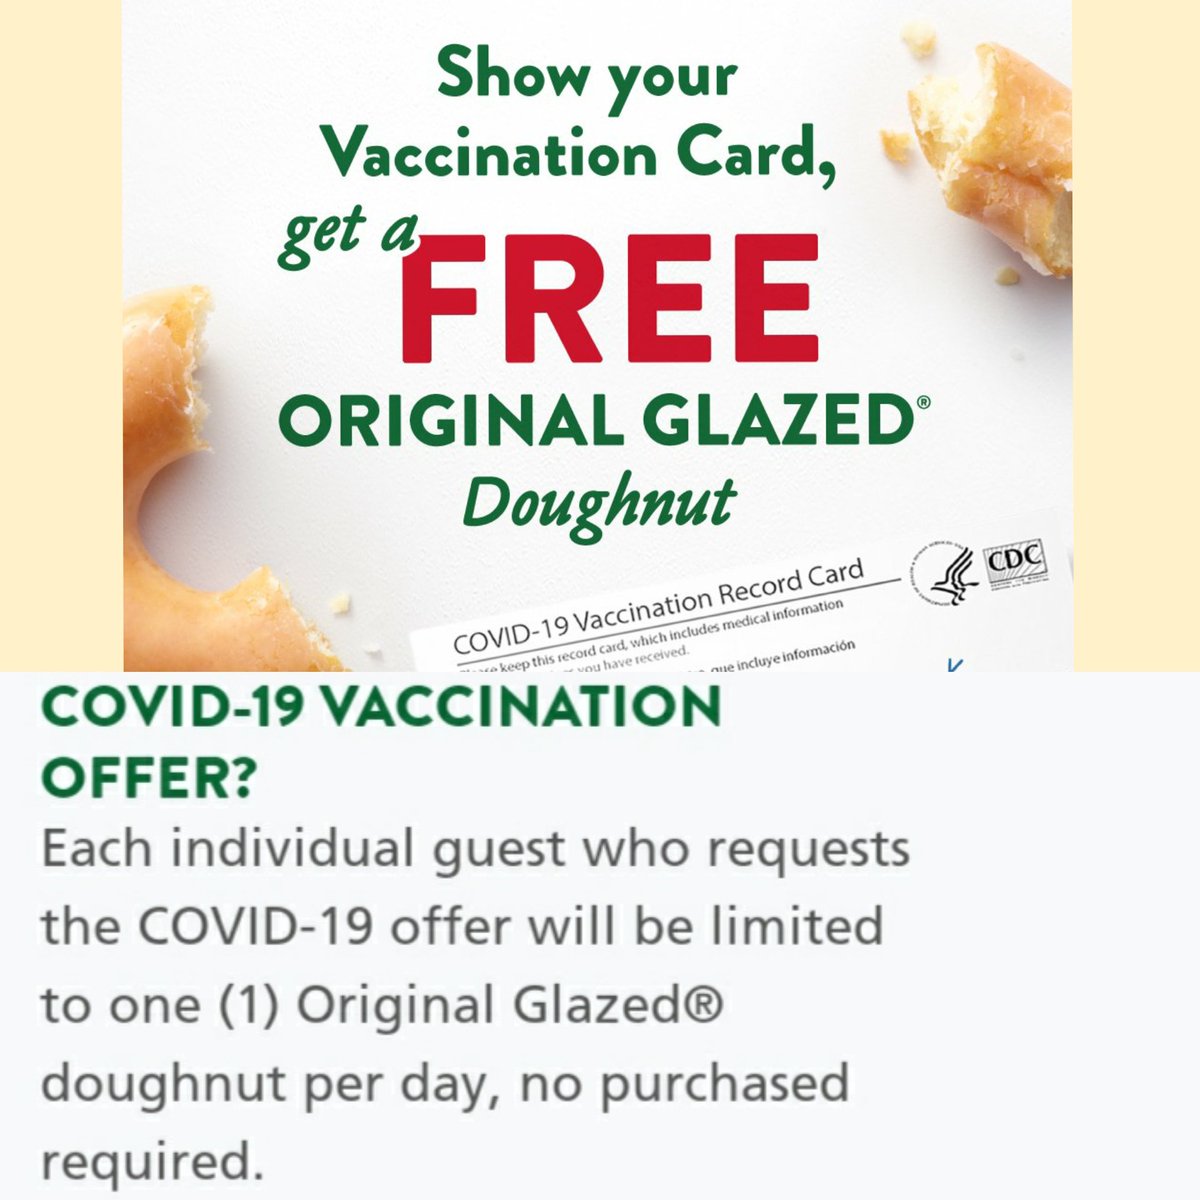 Battle of the Pandemics! Stop Covid by supporting the pandemics of obesity, diabetes, cancer, Alzheimer's & more. One 🍩 donut a day for a year & you may have more to worry about than Covid. Sugar supresses the immune symptom, feeds pathogens, & drives our global health issues.